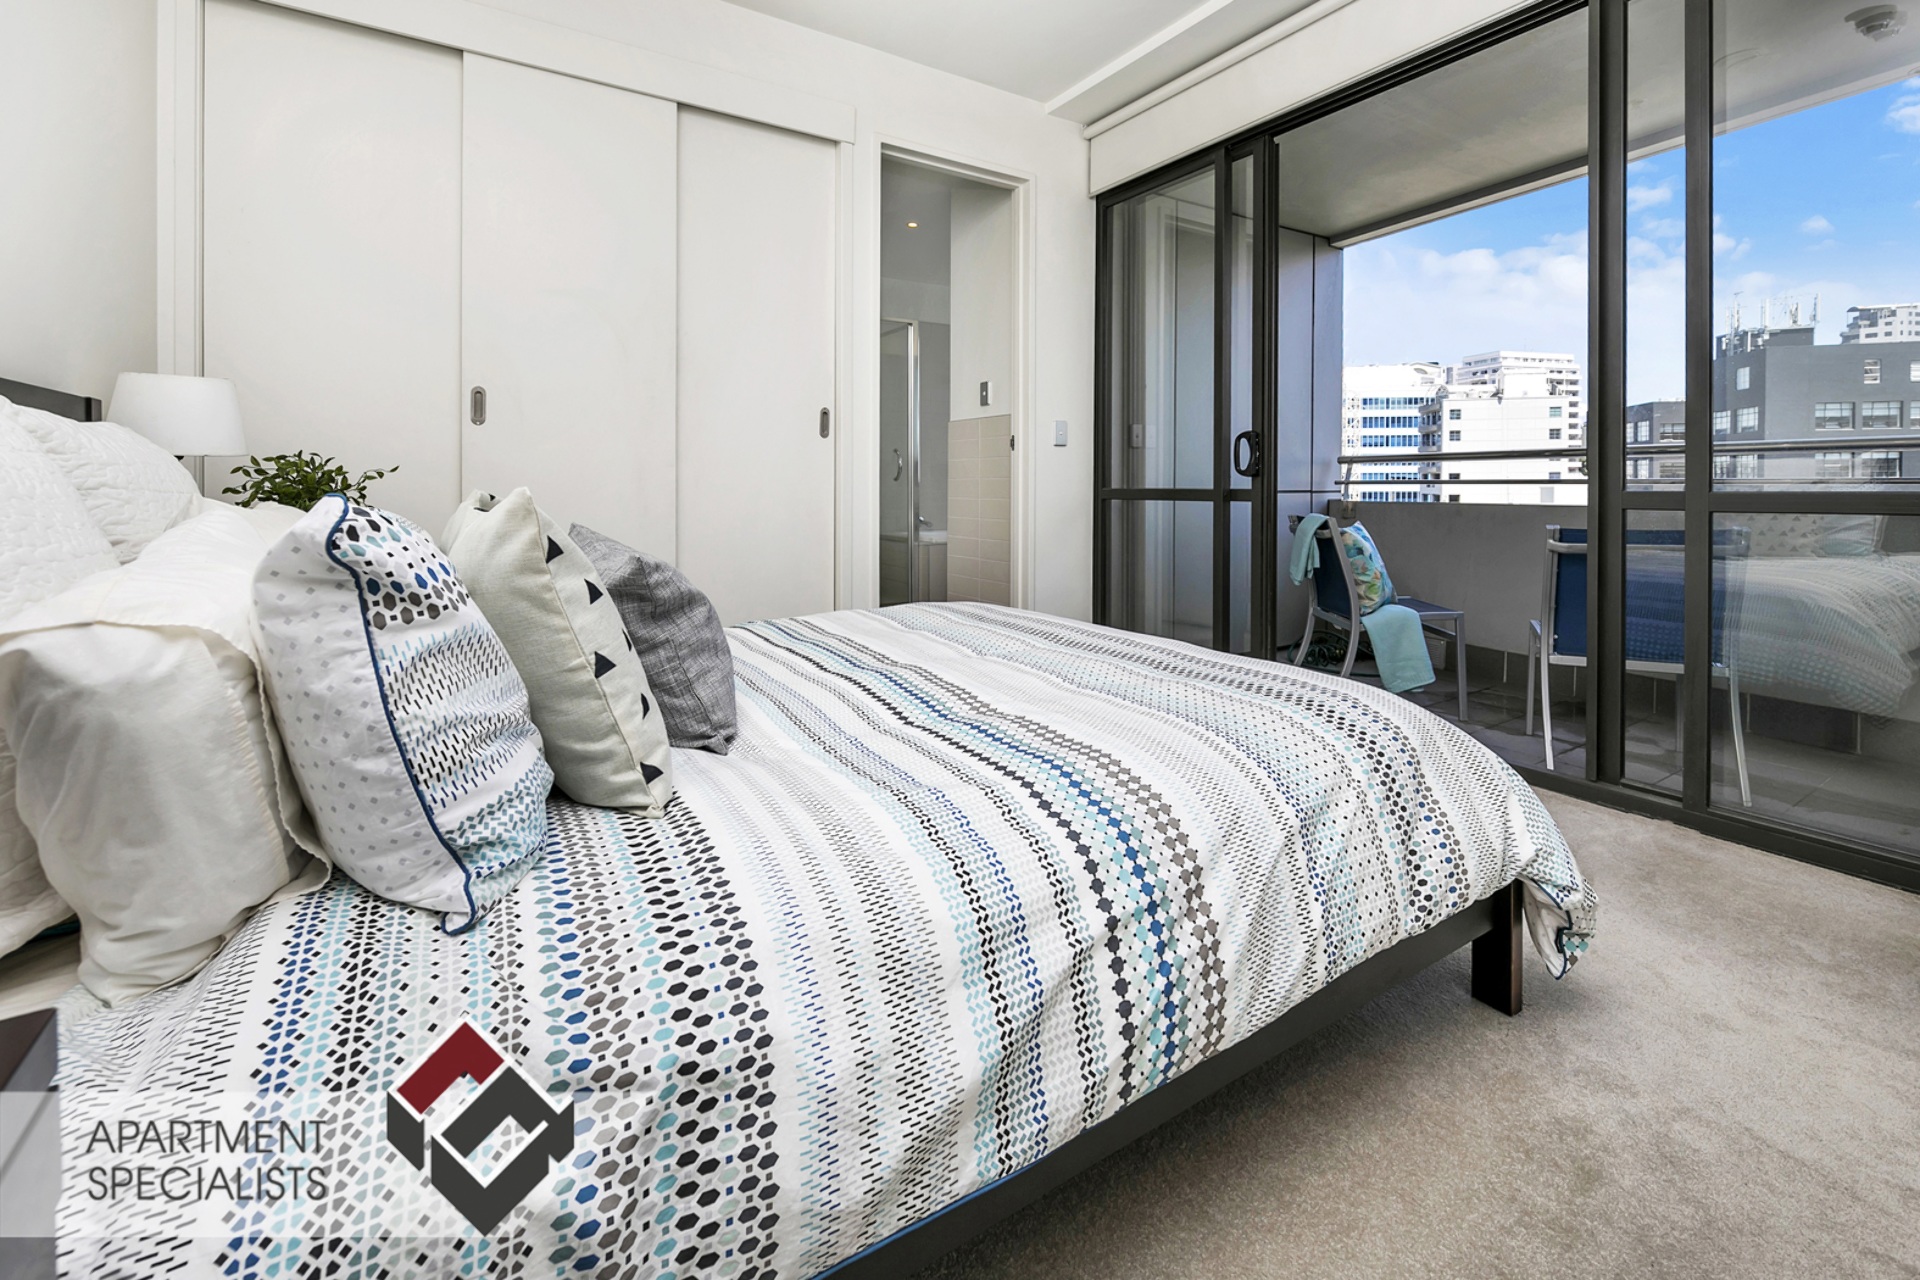 9 | 18 Beach Road, City Centre | Apartment Specialists